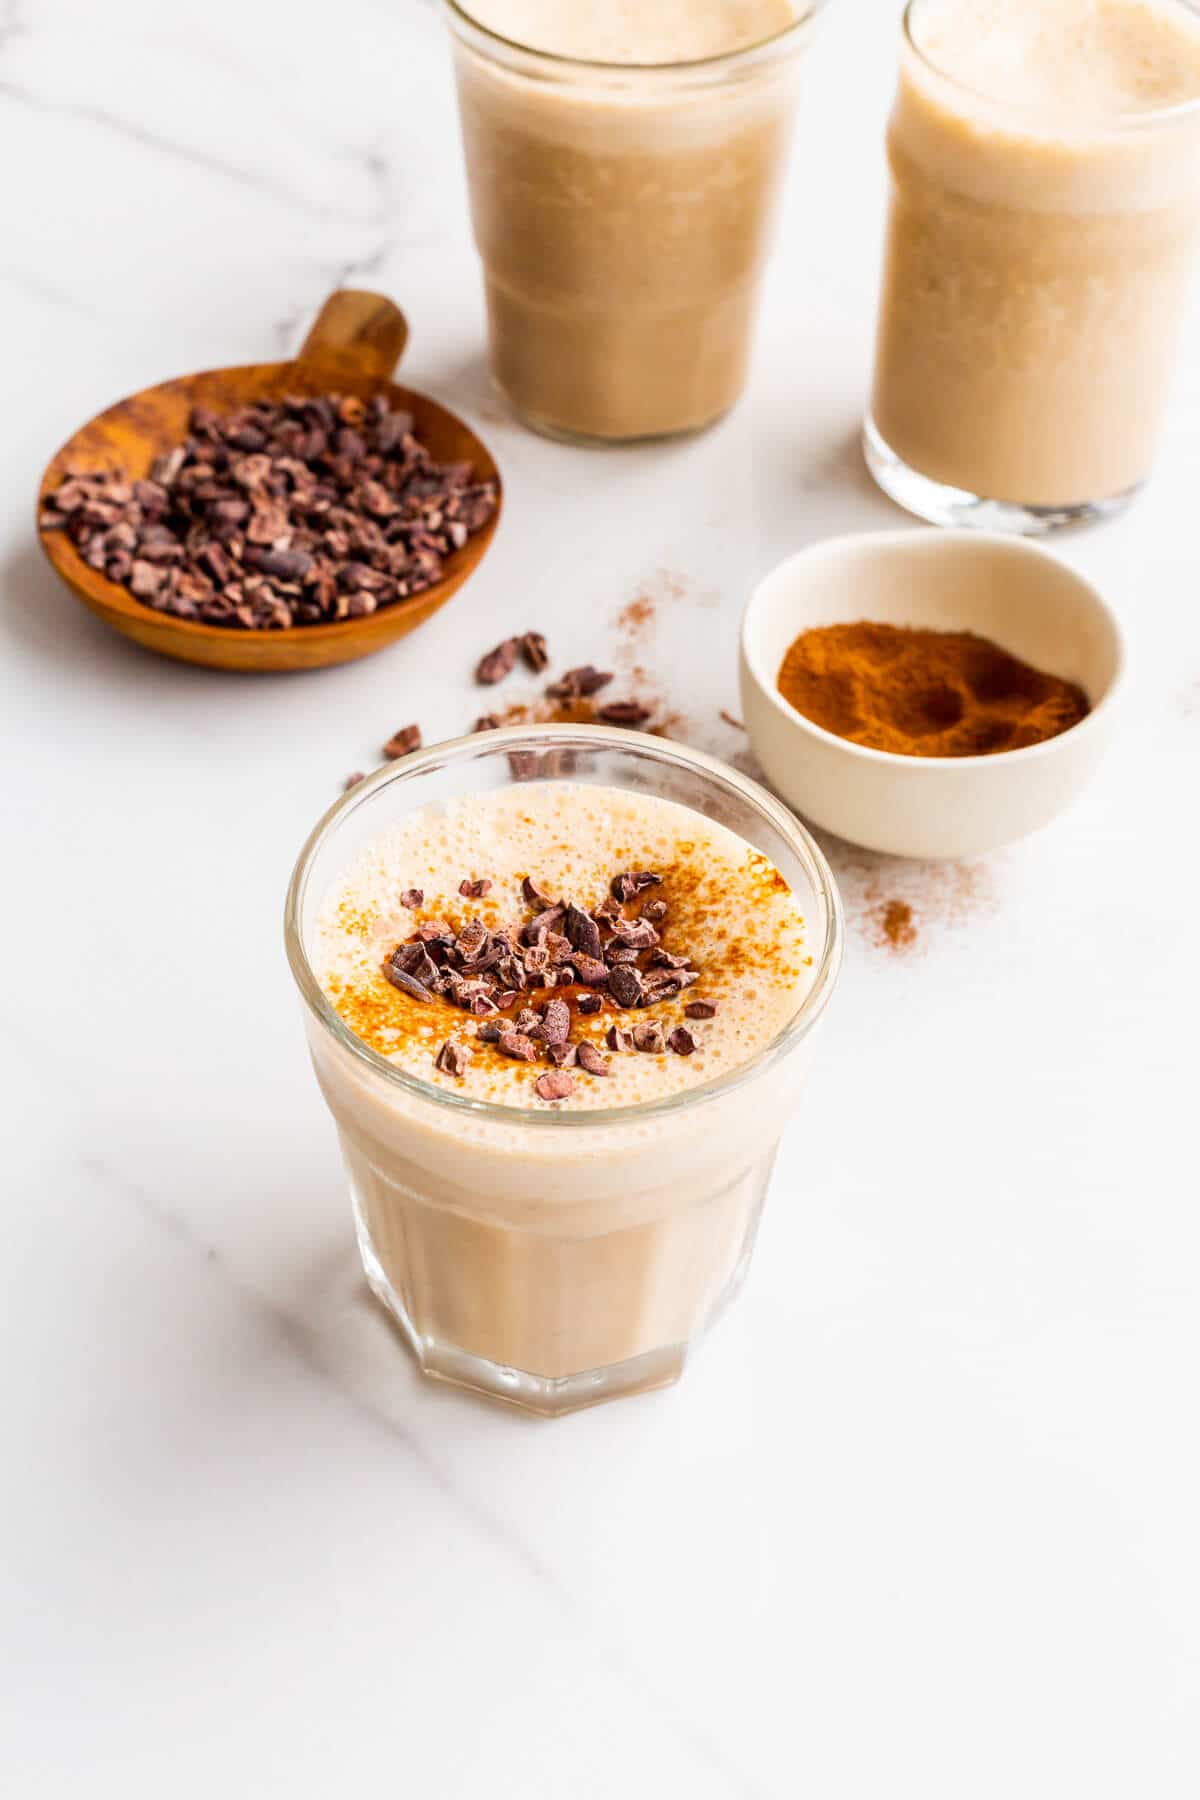 Small glasses of coffee banana smoothie topped with espresso powder and cocoa nibs.